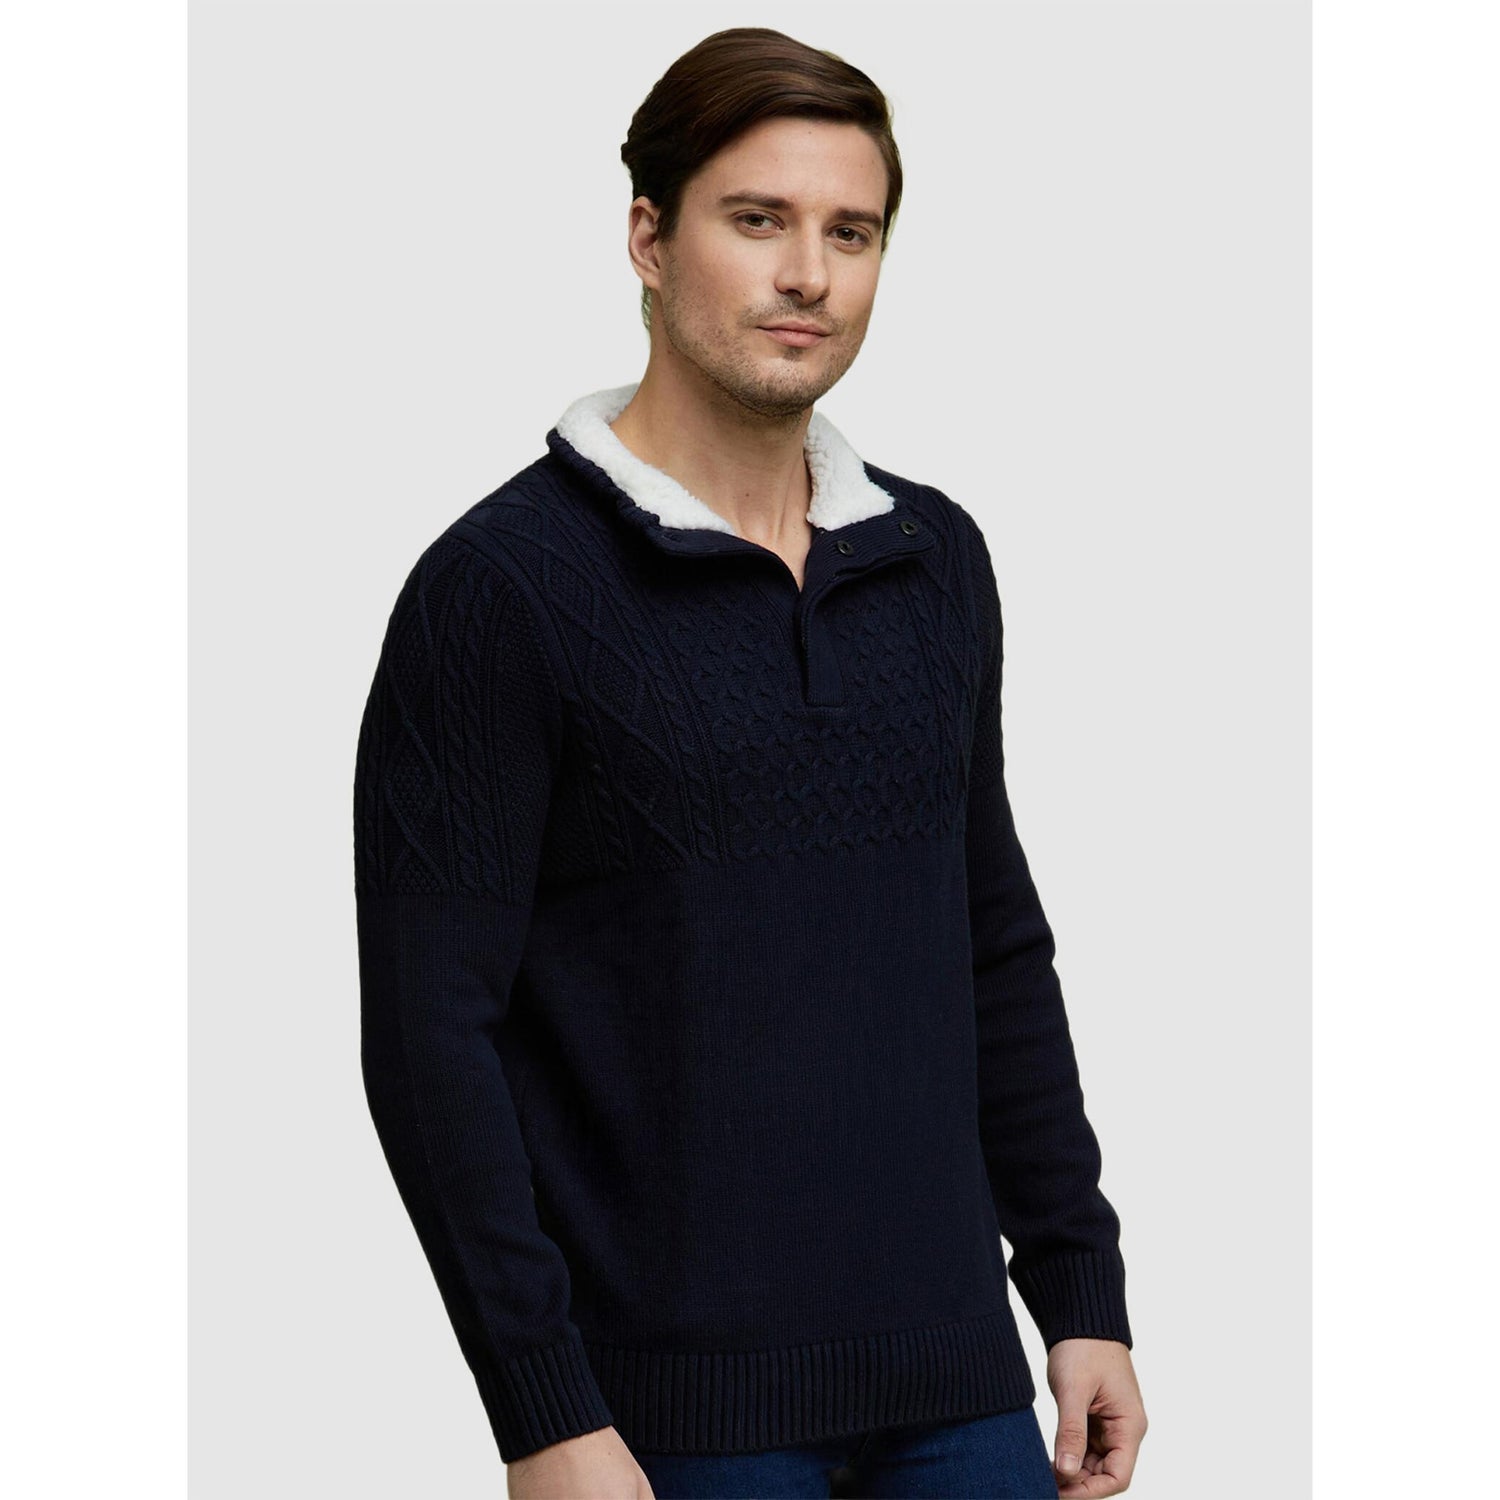 Men's Navy Blue Solid Sweaters (Various Sizes)